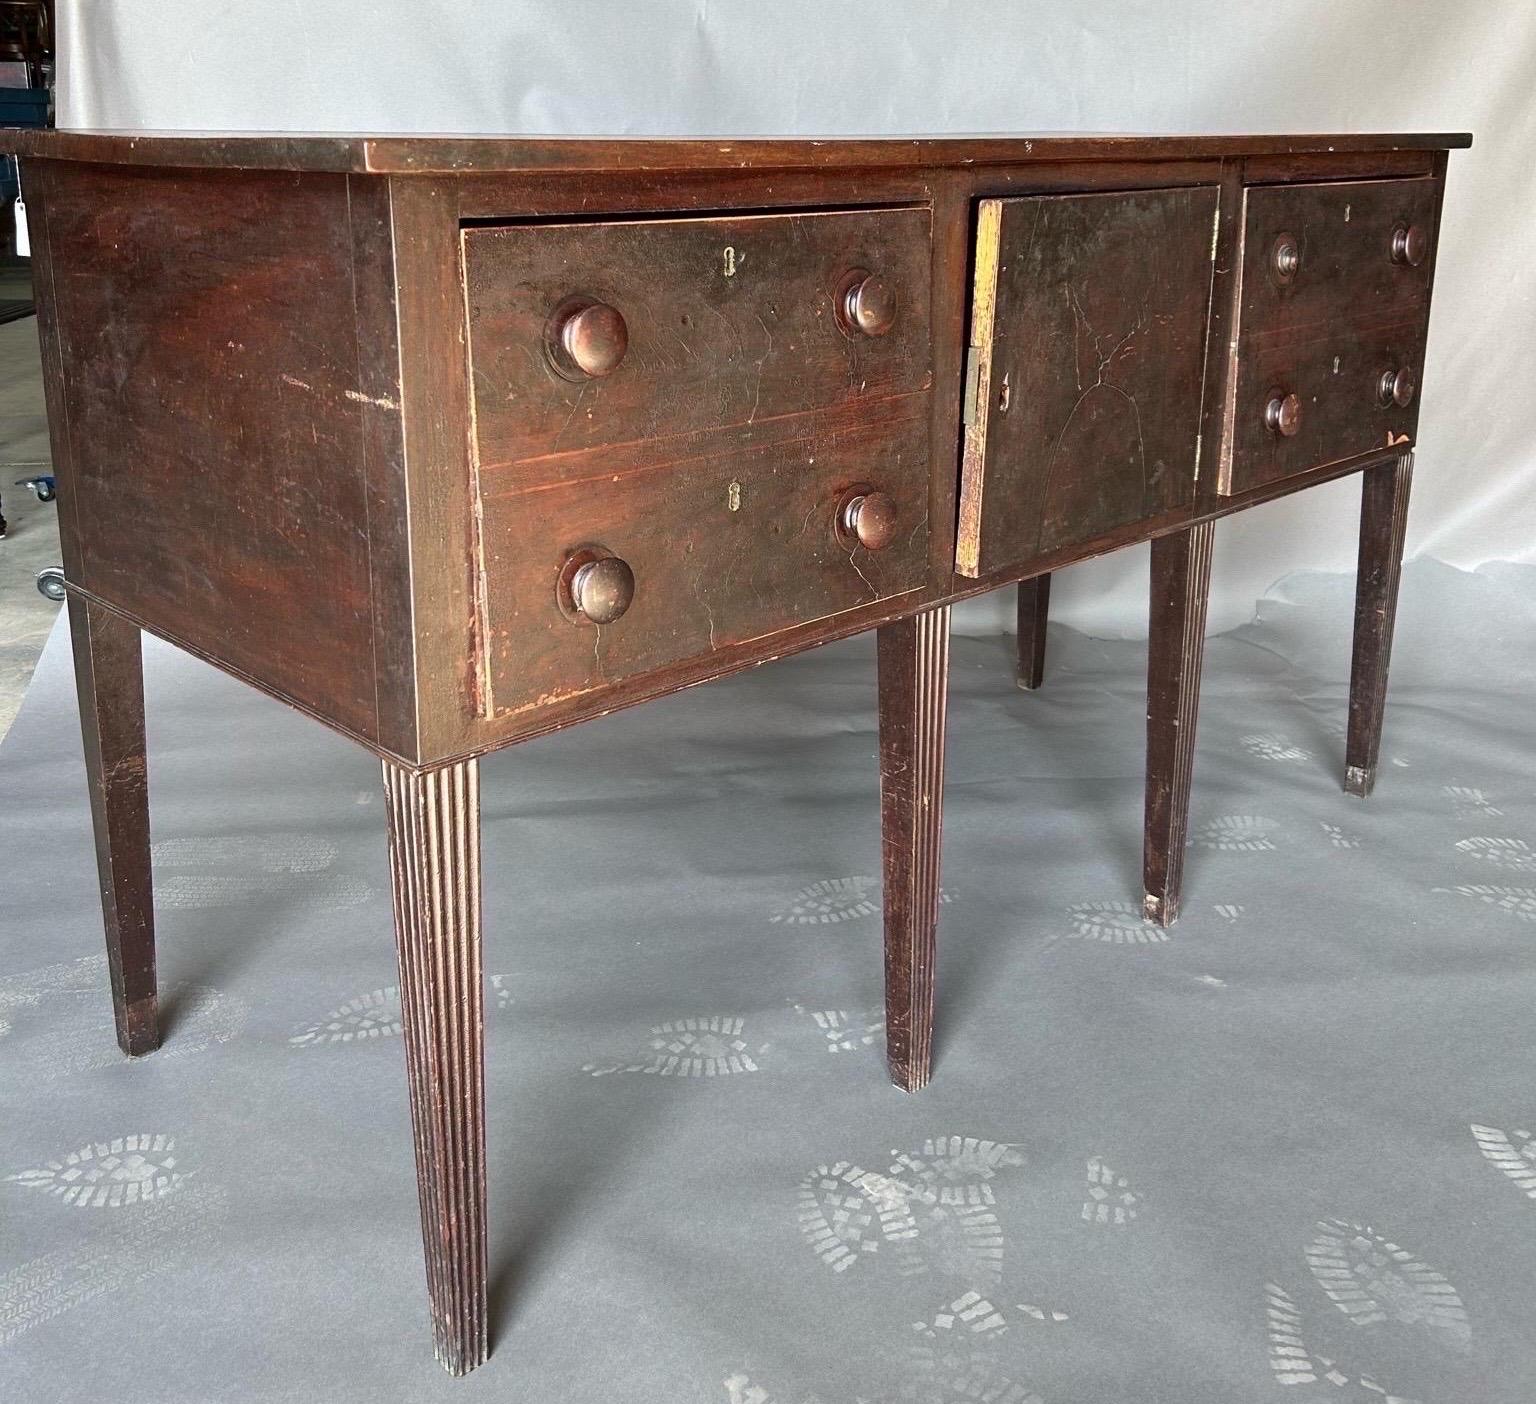 Nicely proportioned 19th century Southern backcountry mahogany veneered sideboard with reeded legs, possibly made in GA or SC. In untouched, 